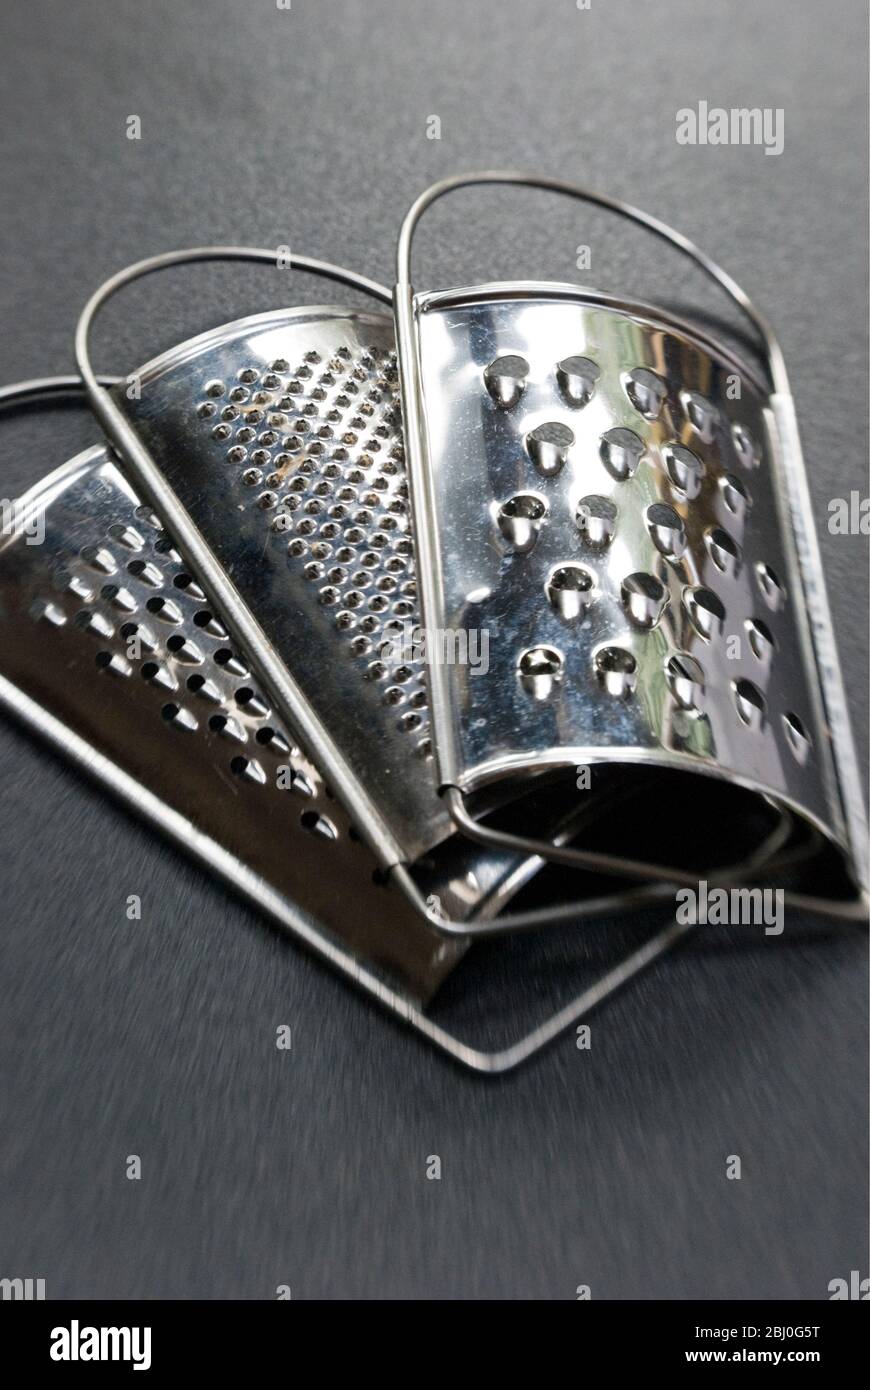 Set of three small graters, with different size holes - Stock Photo